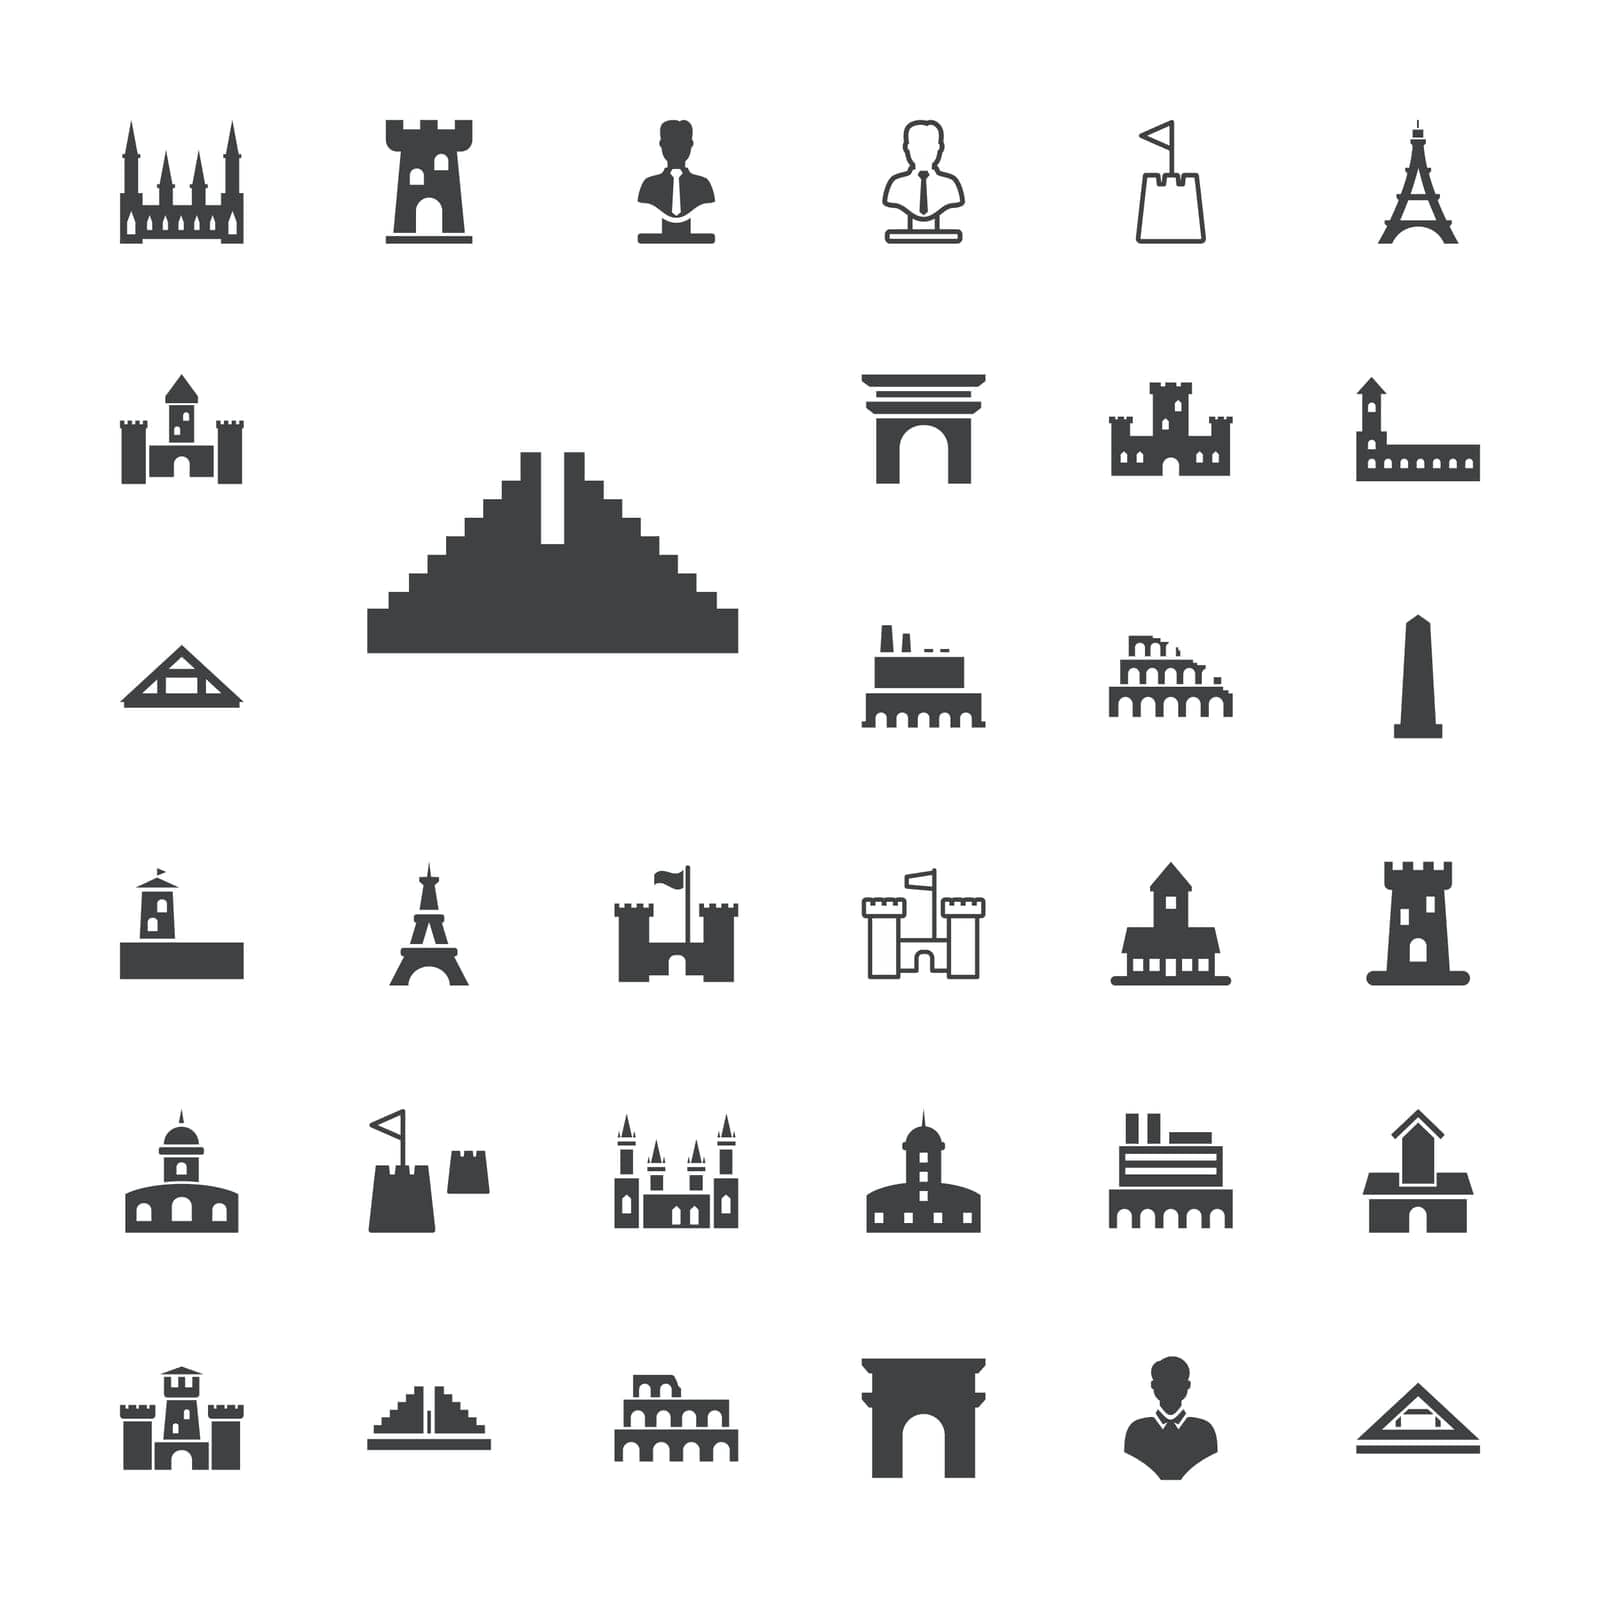 symbol,de,castle,chichen,icon,isolated,historical,tourism,louvre,monument,building,chateau,triomphe,arc,interest,design,fairytale,knight,eiffel,bust,vector,place,landmark,tower,architecture,set,coliseum,itza,old,medieval,history,ancient,kingdom,fortress,museum,silhouette,illustration,fort,travel,royal by ogqcorp